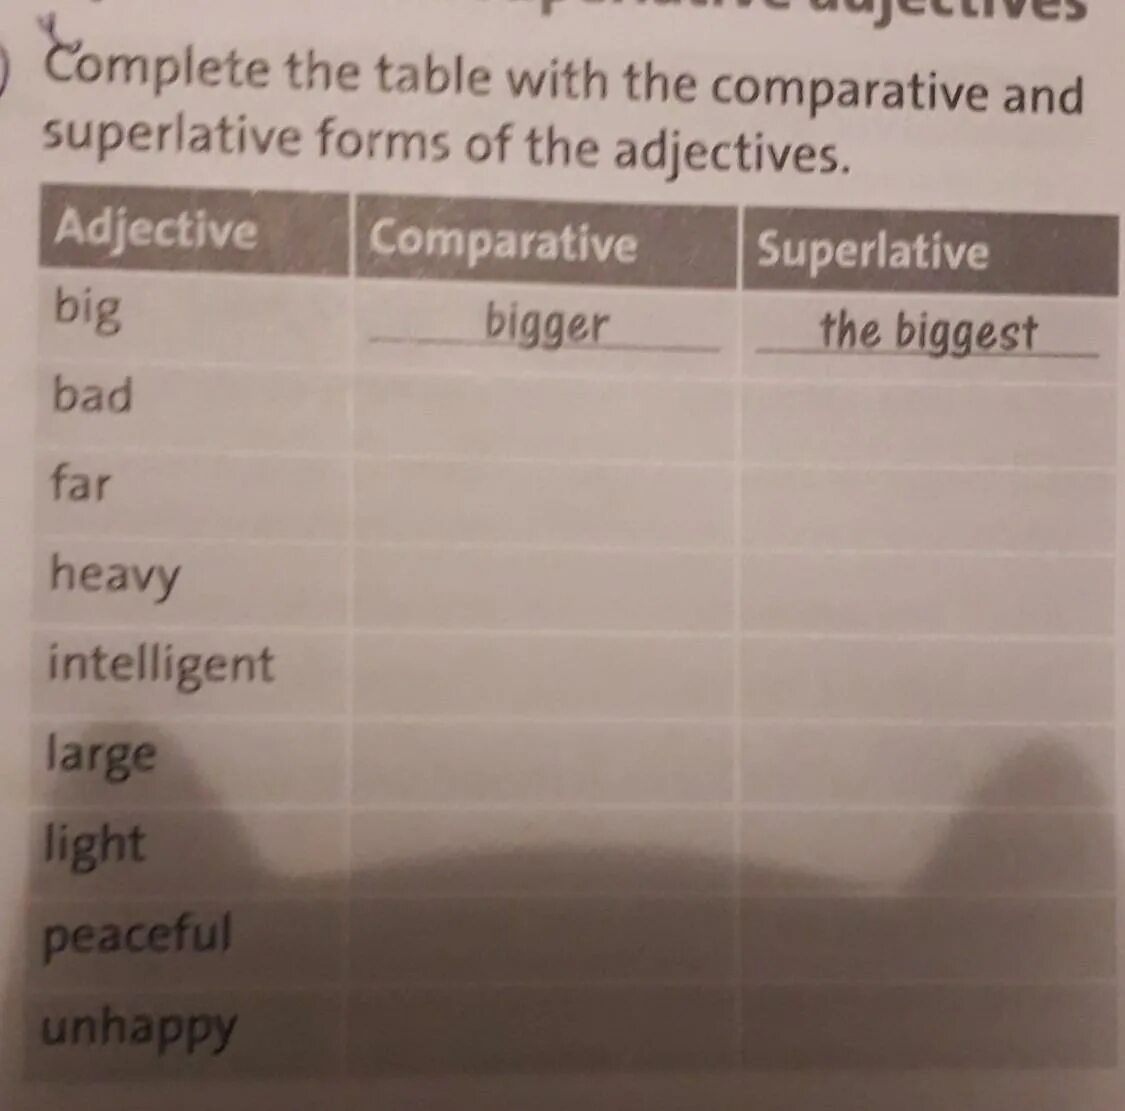 Complete the good. Complete the Table with the Comparative or Superlative form of adjectives 5 класс. Complete the Table with the Comparative or Superlative form of adjectives решение 5 класс. Complete the Table with the Comparative. Complete the Table with the Comparative and Superlative forms of the adjectives.